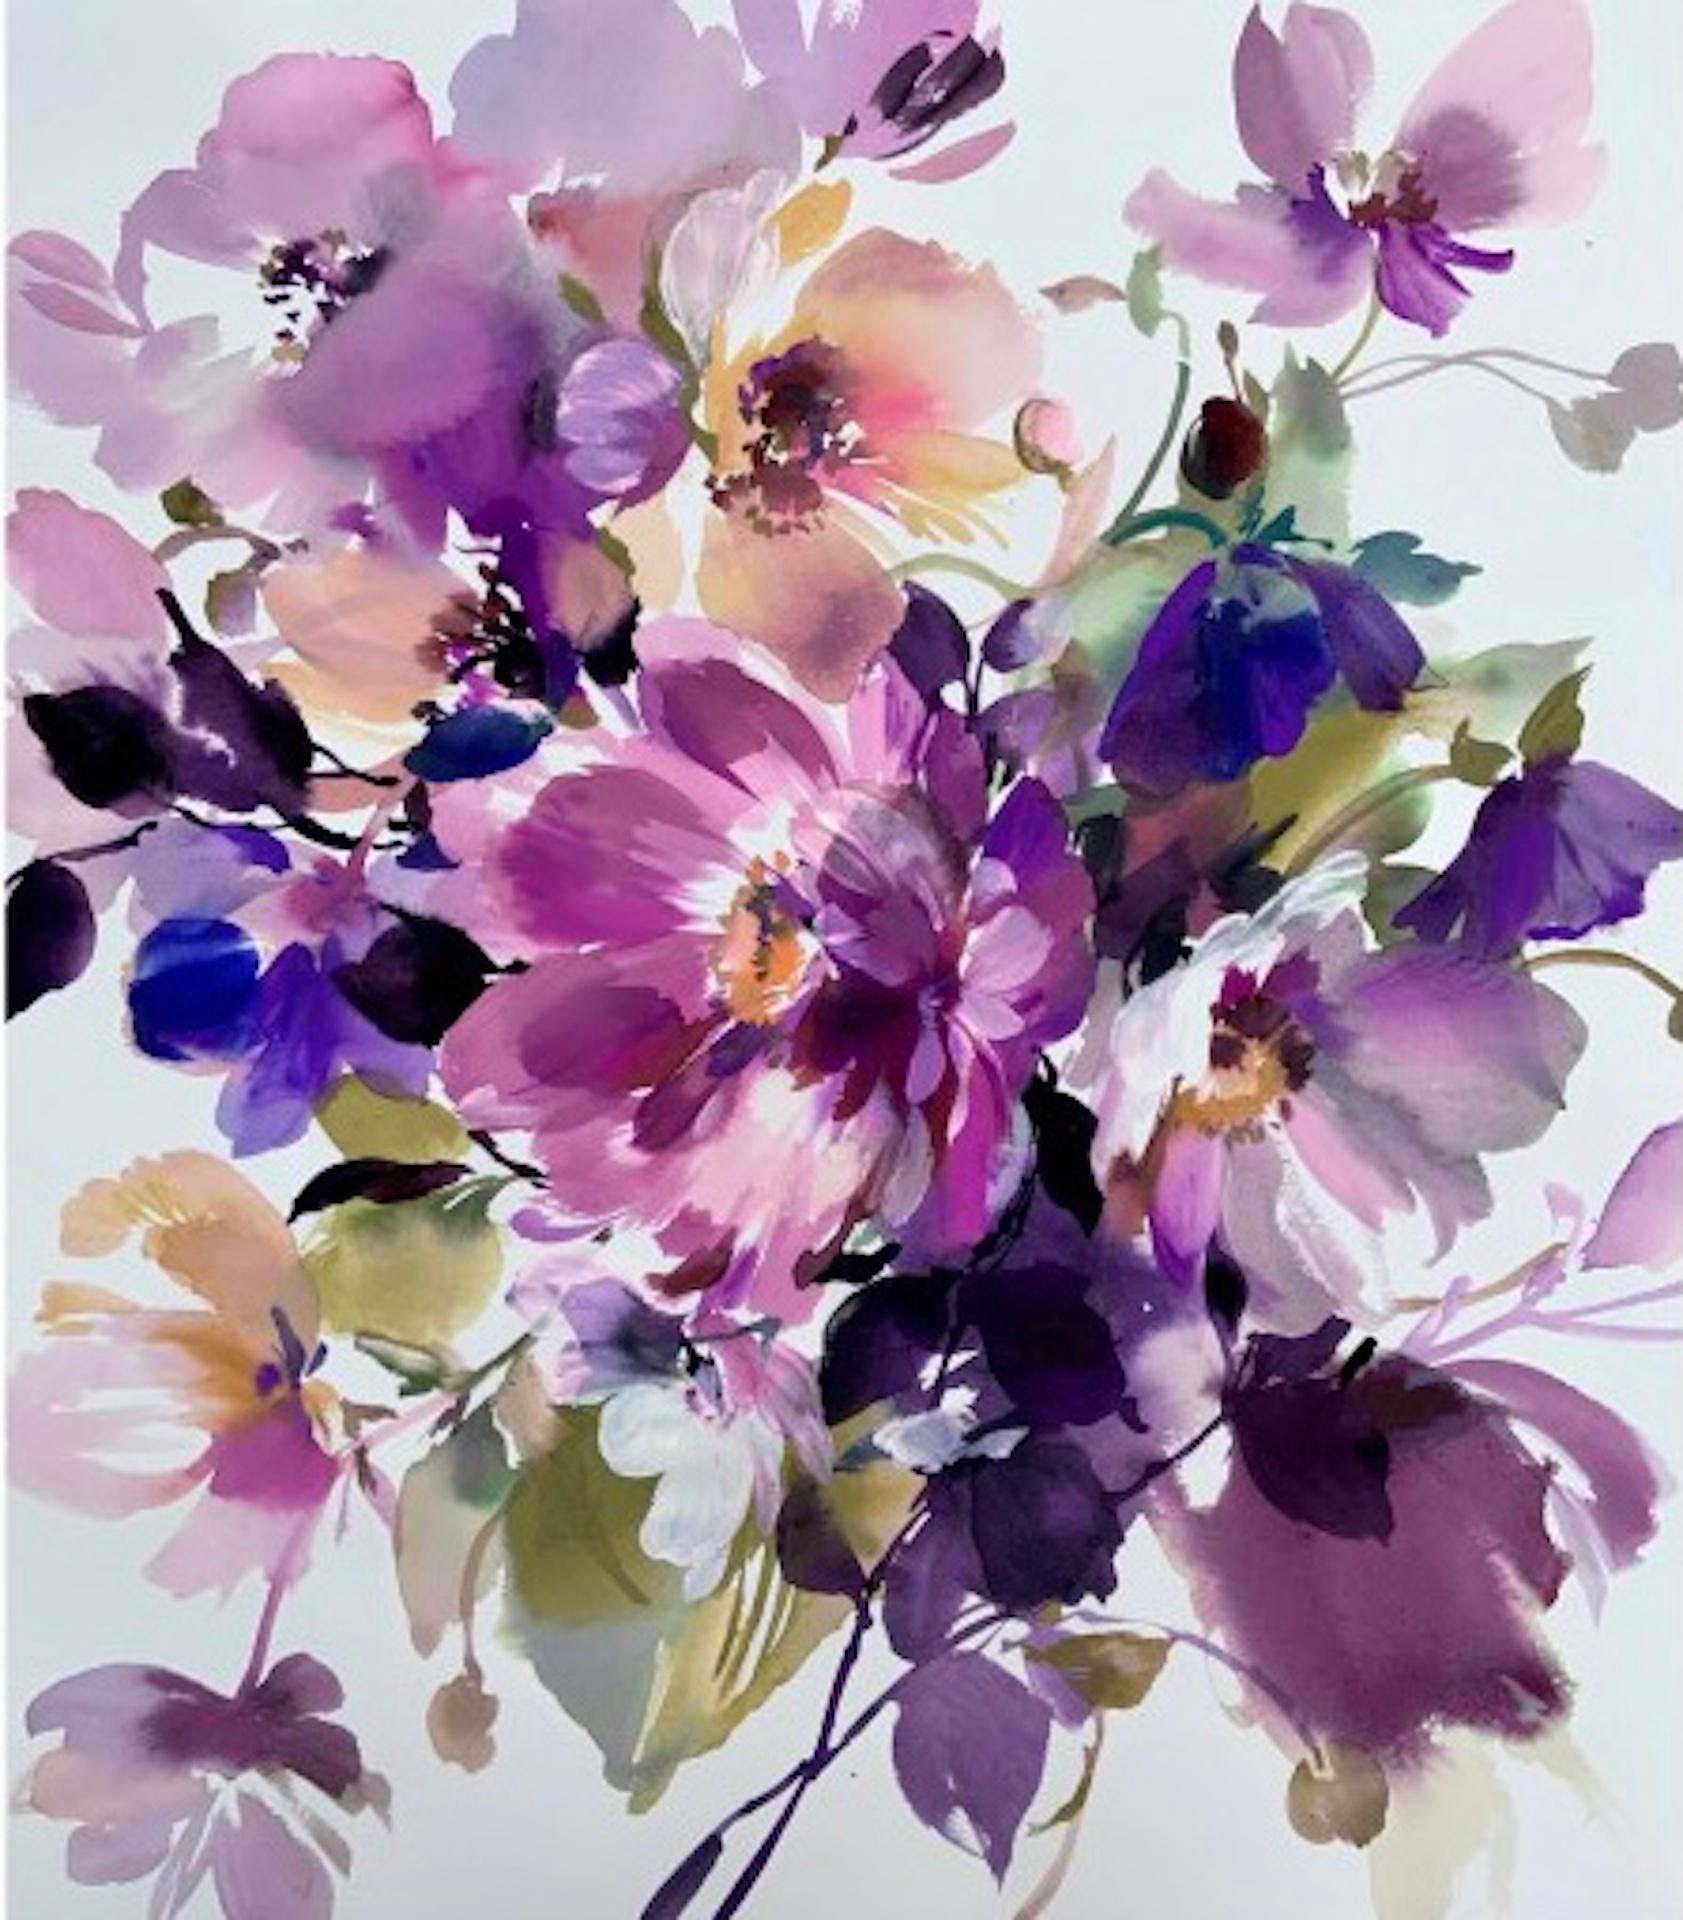 Jo Haran
Peony Love
Original Floral Painting
Watercolour, Gouache and Gesso on paper
Image Size: 60cm x 53.5cm
Sheet/Canvas Size: 64cm x 56cm
Sold Unframed
Please note that in situ images are purely an indication of how a piece may look.

Peony Love